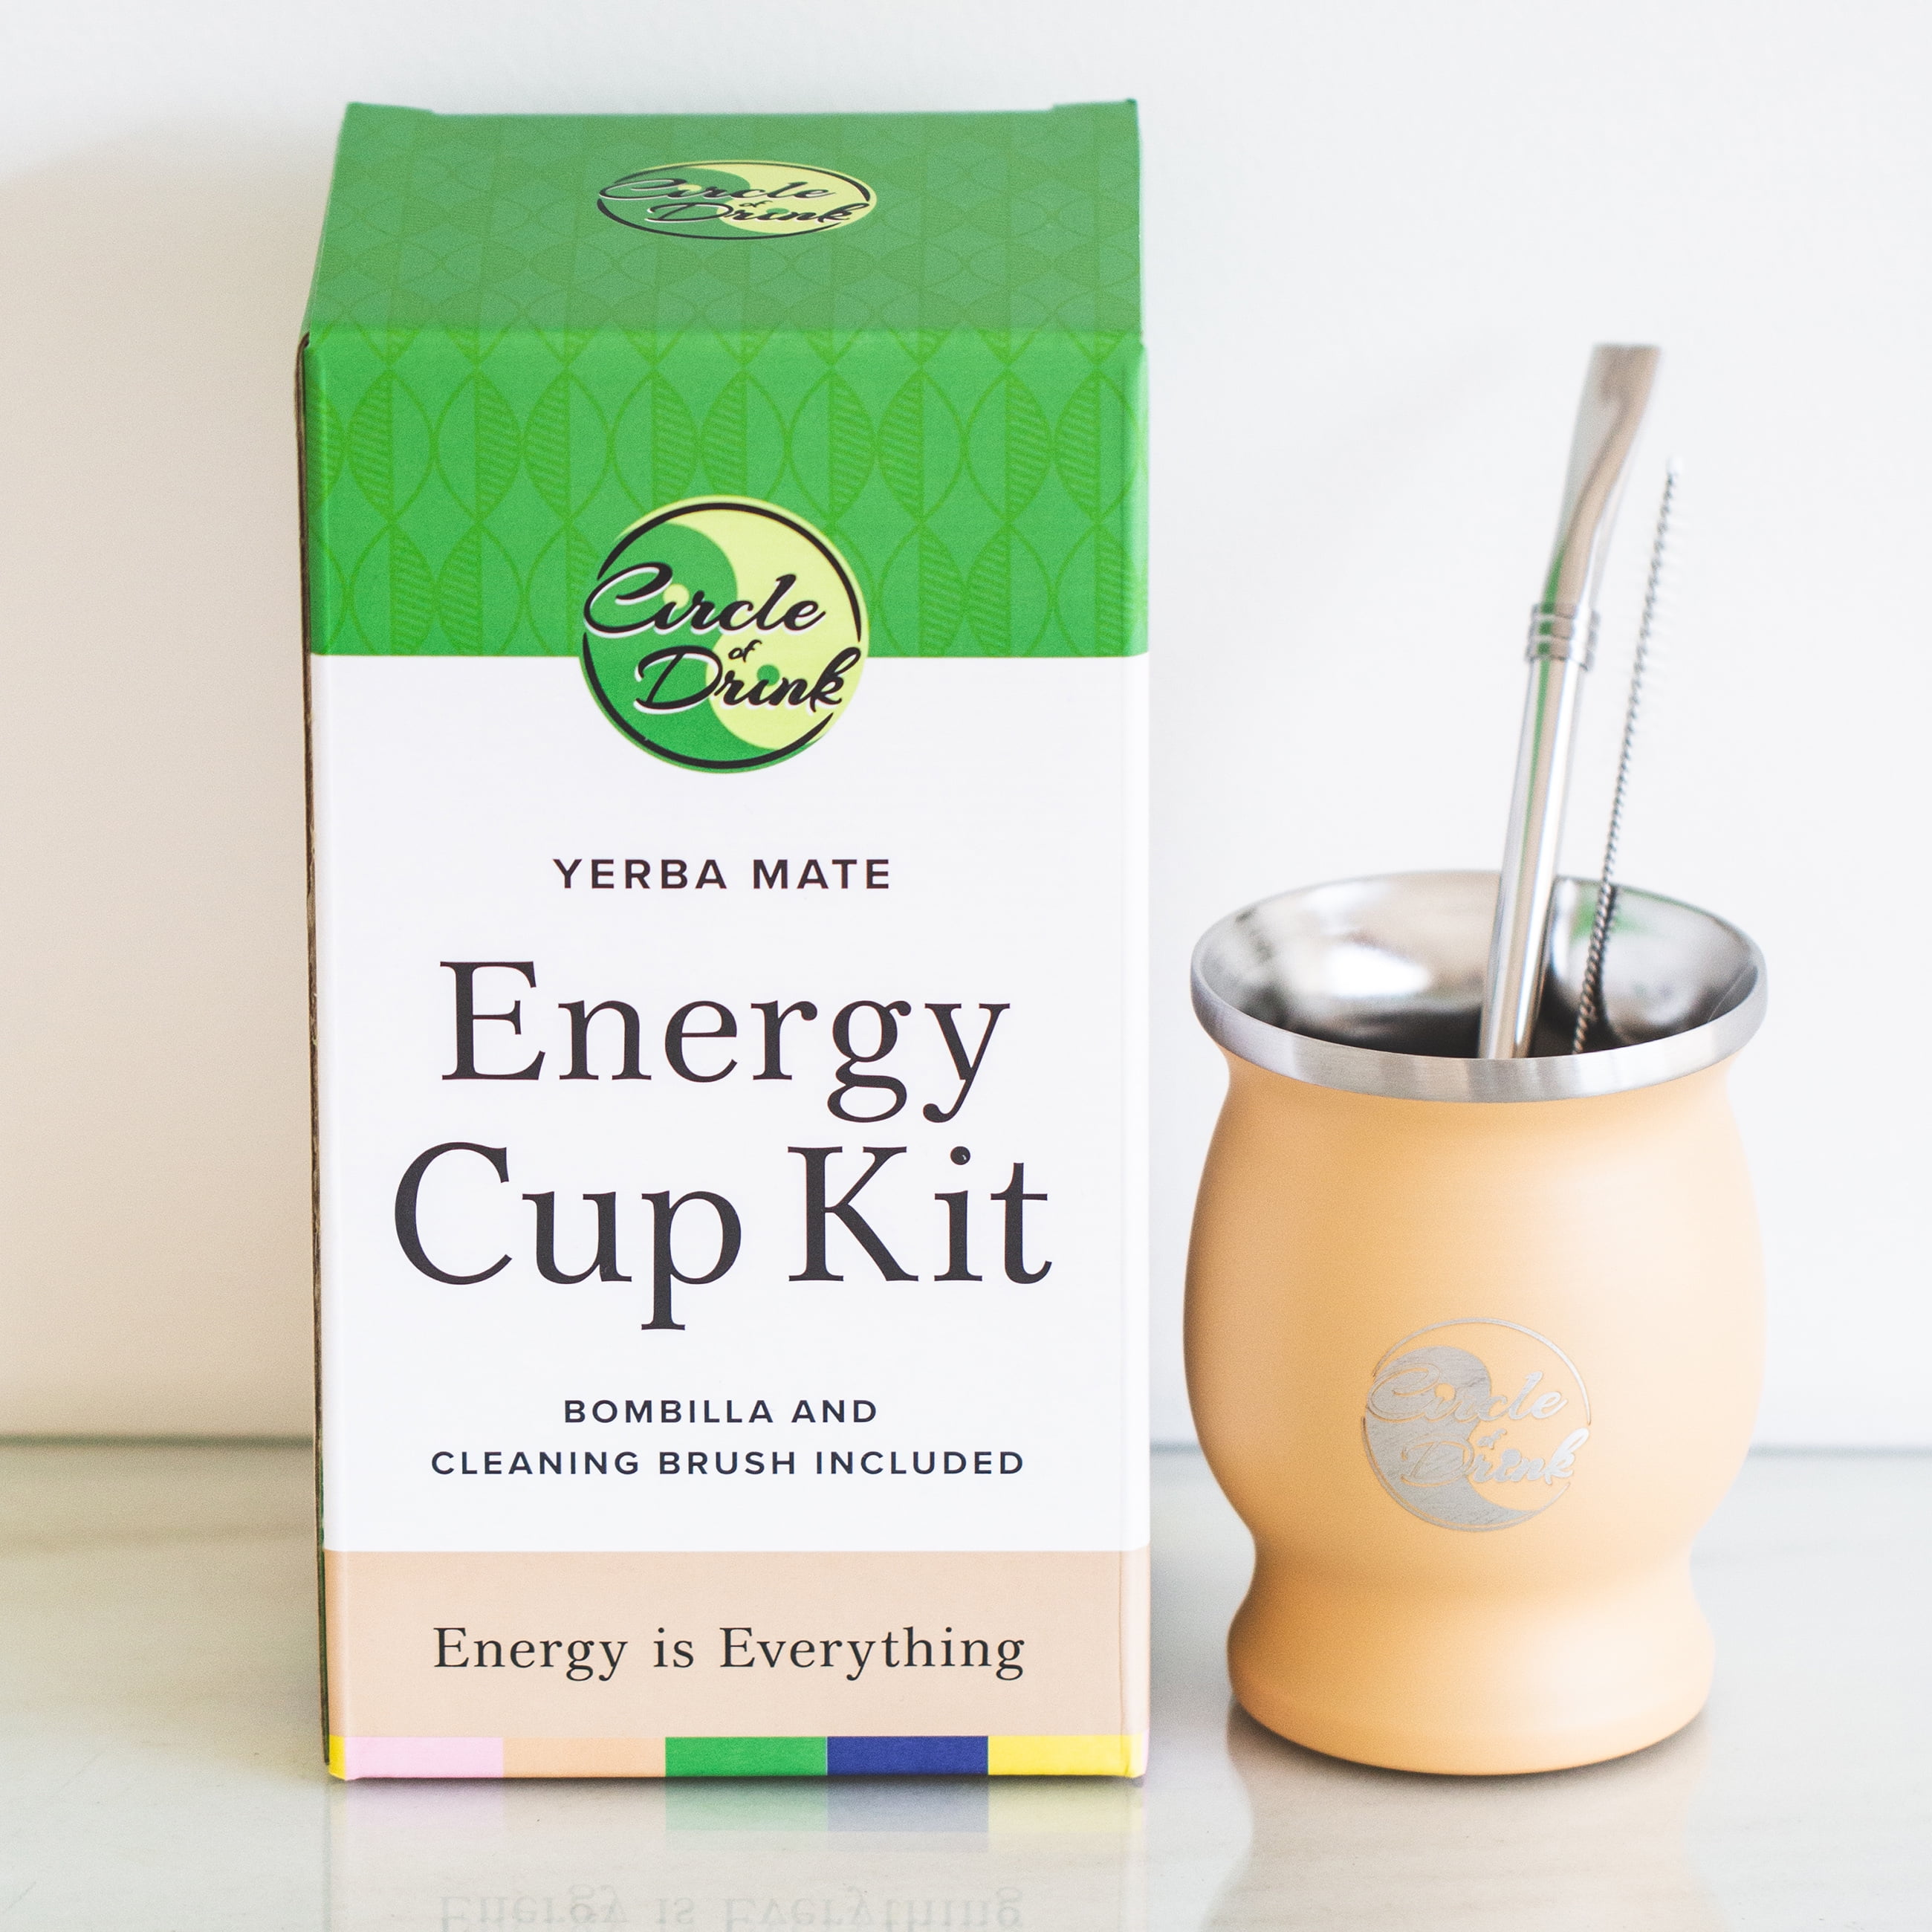 Circle of Drink - Acceptance Energy Cup Yerba Mate Kit - Double Wall -  Includes Stainless Steel Bombilla and Cleaning Brush - 8oz, 50g Capacity 